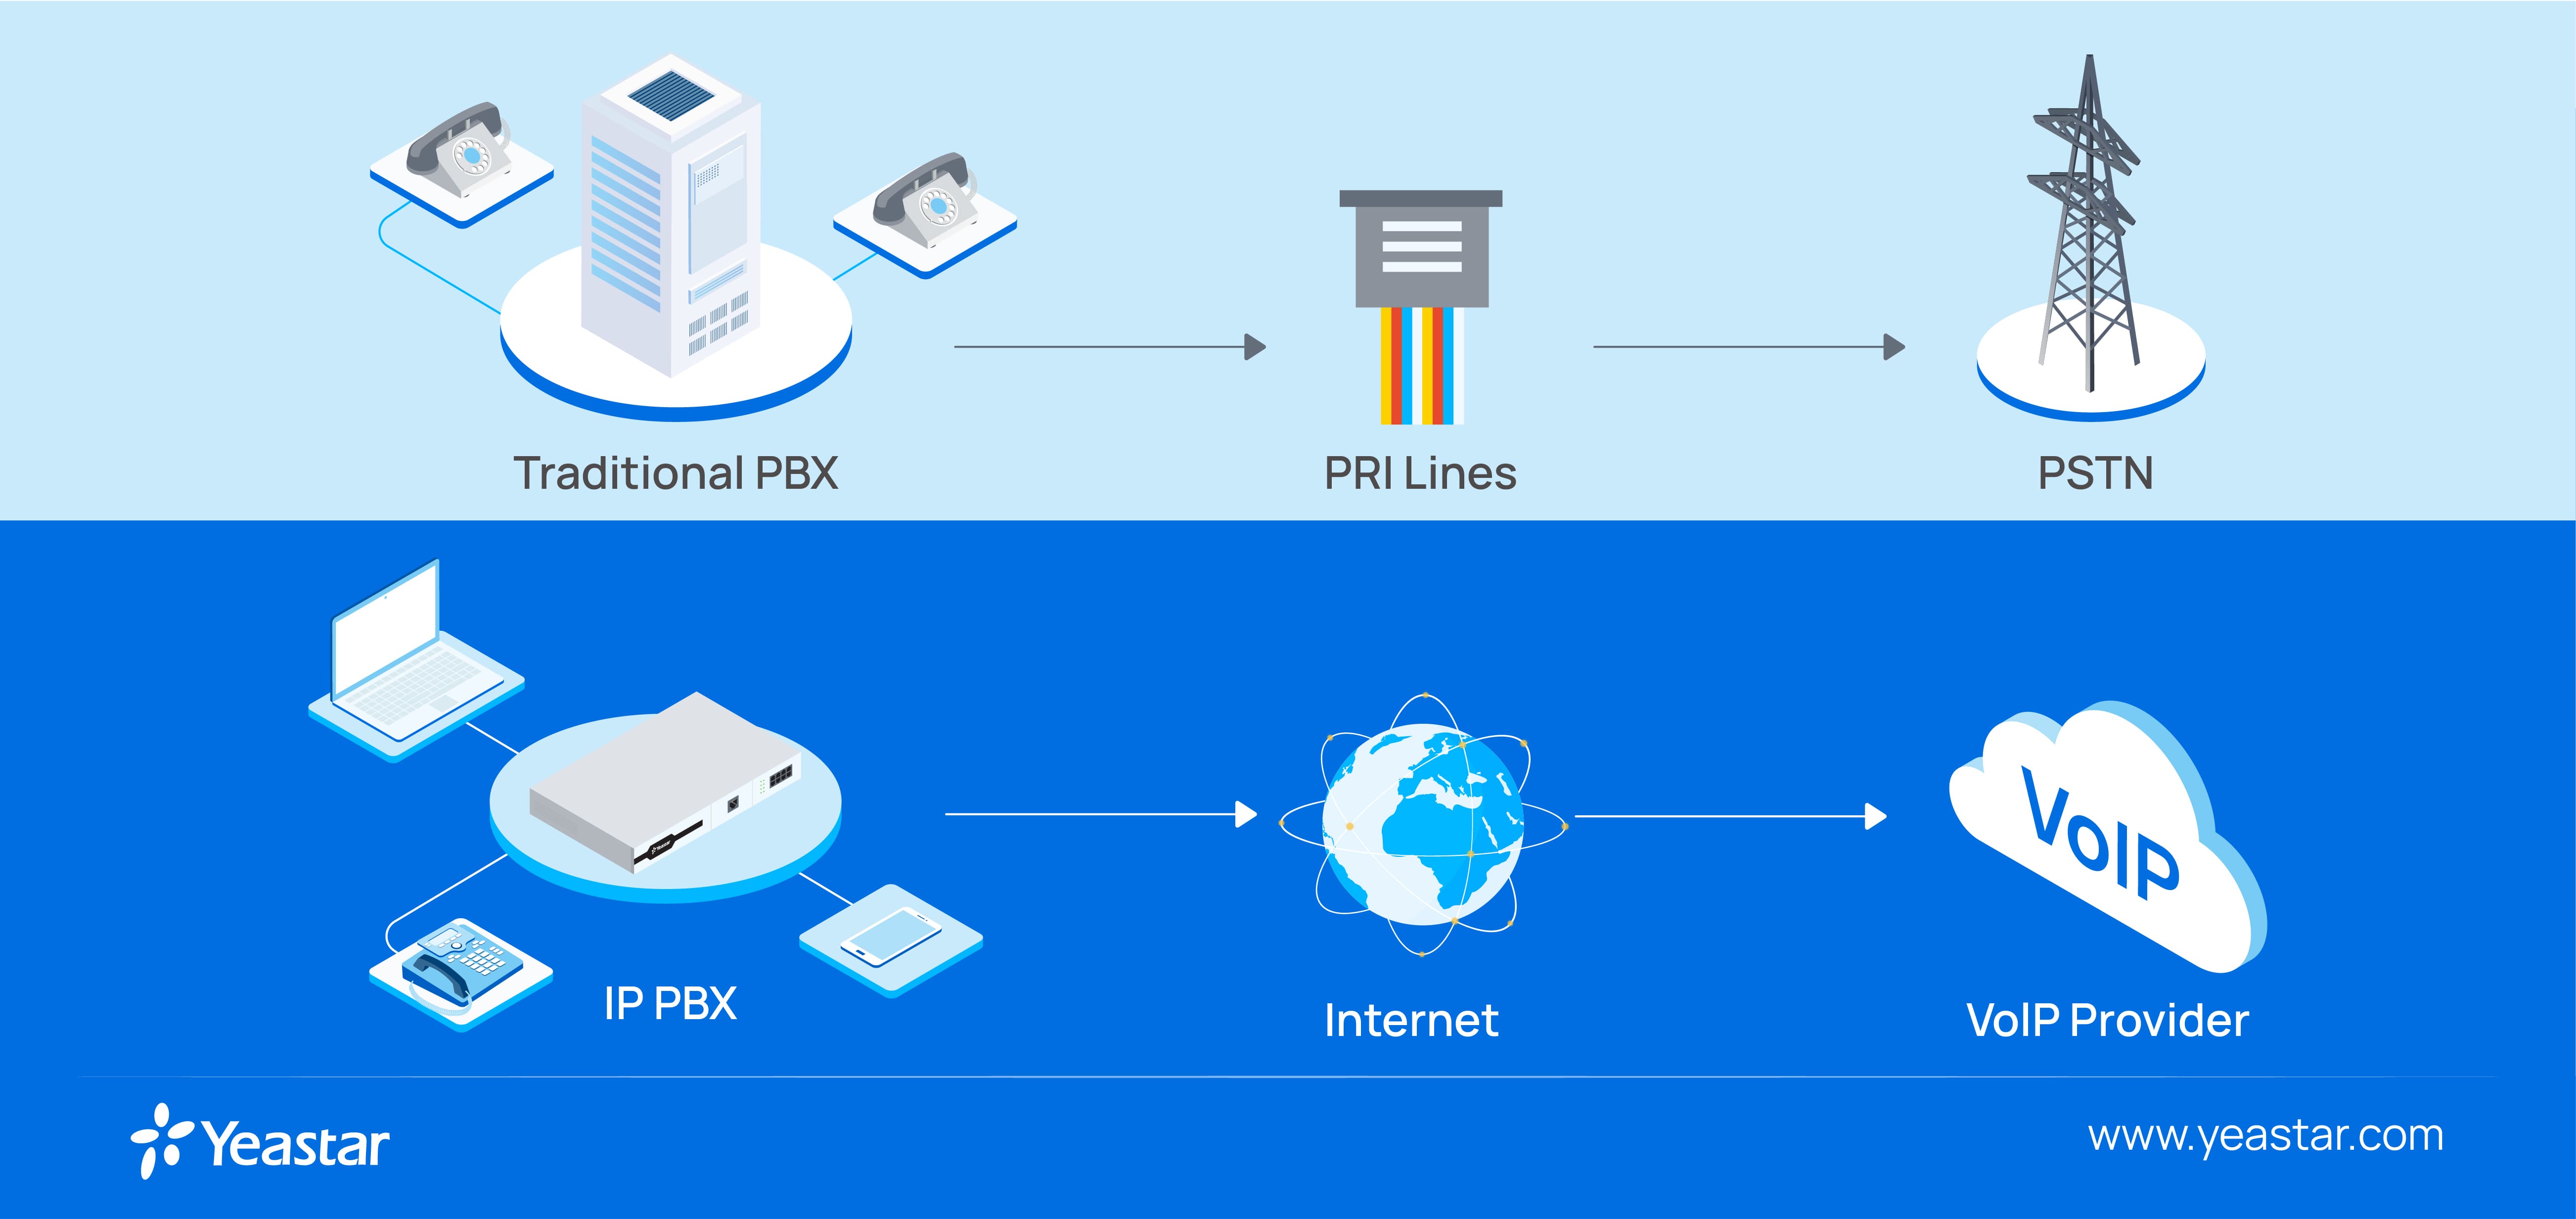 VoIP vs. PSTN, the different workflow at a glance